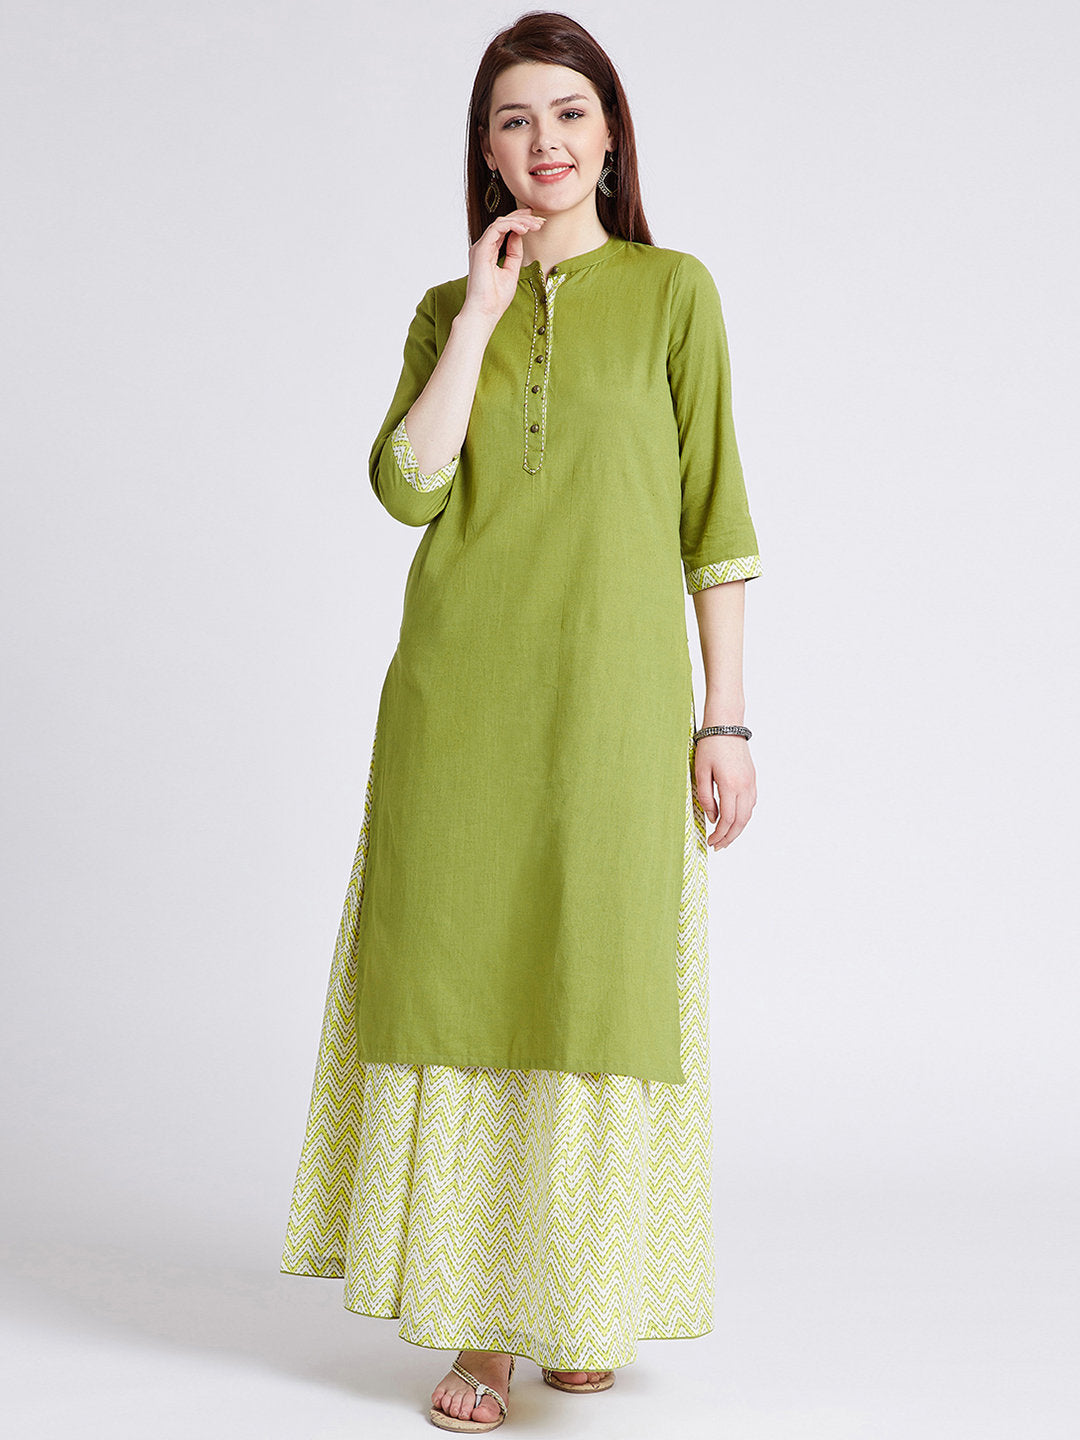 Hand block printed skirt with long cotton kurta with kantha hand embroidery and detailing